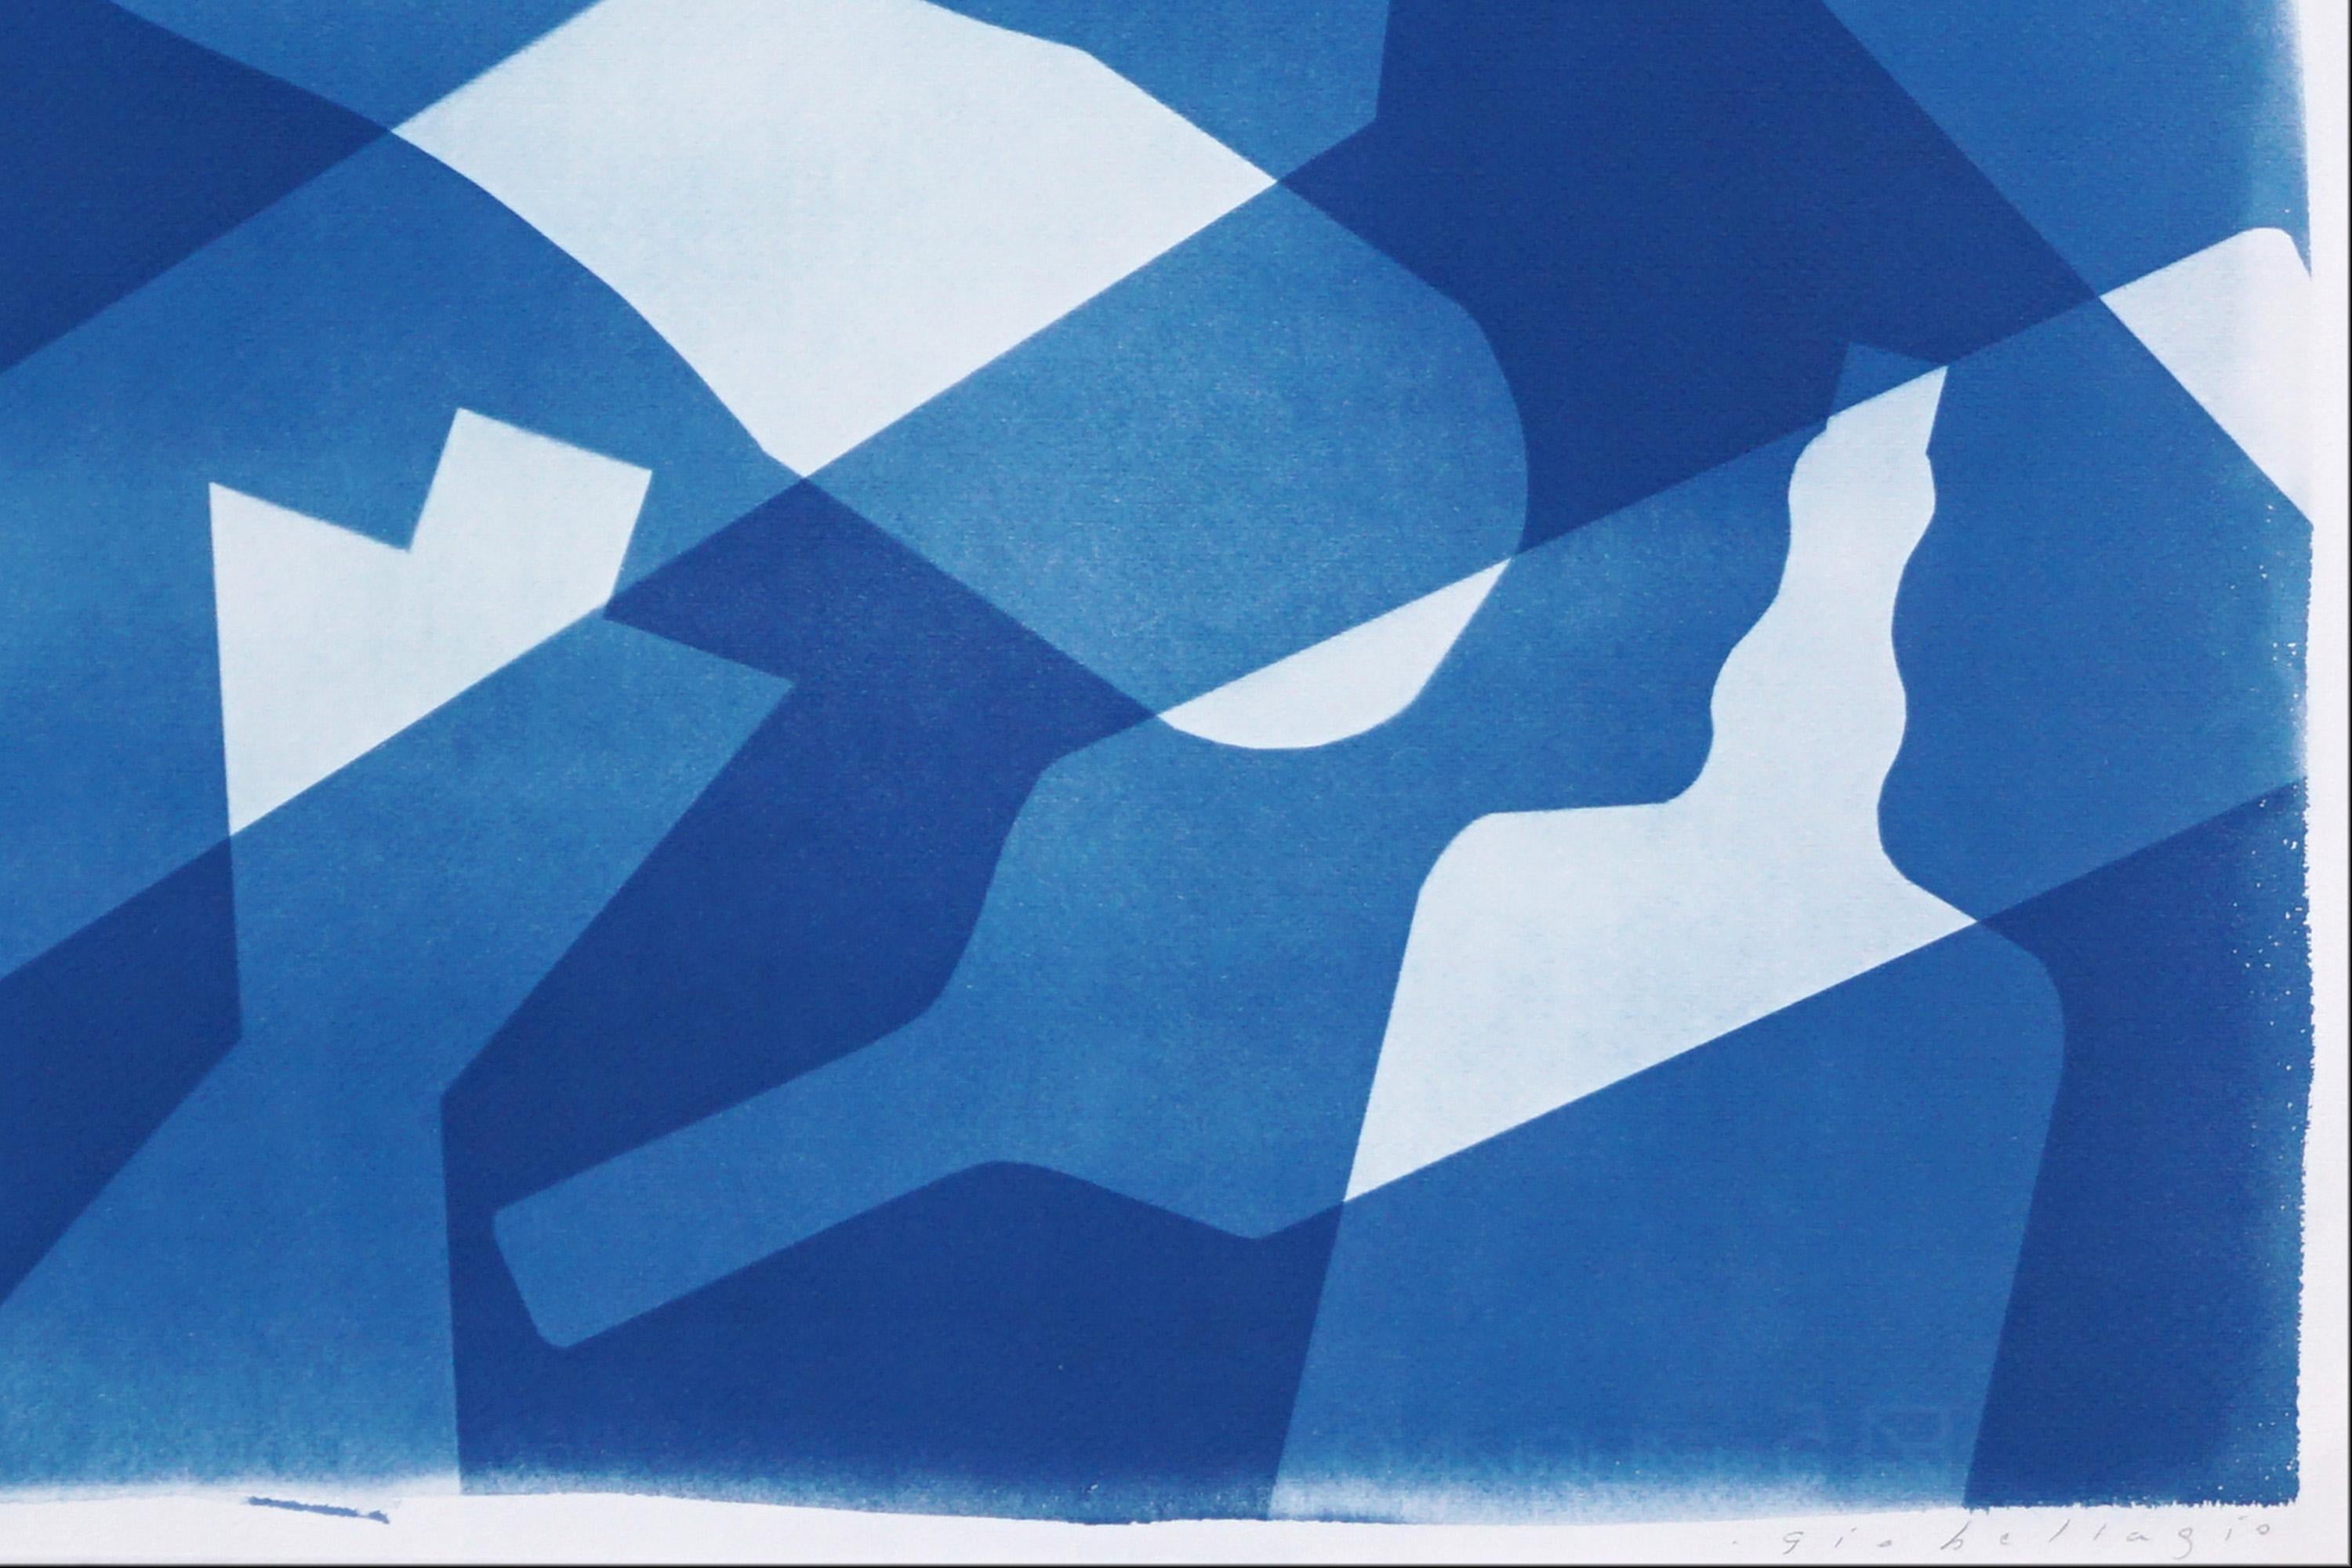 Falling Bottles, Still Life in Blue Tones, Patterns and Layers, Unique Cyanotype For Sale 2